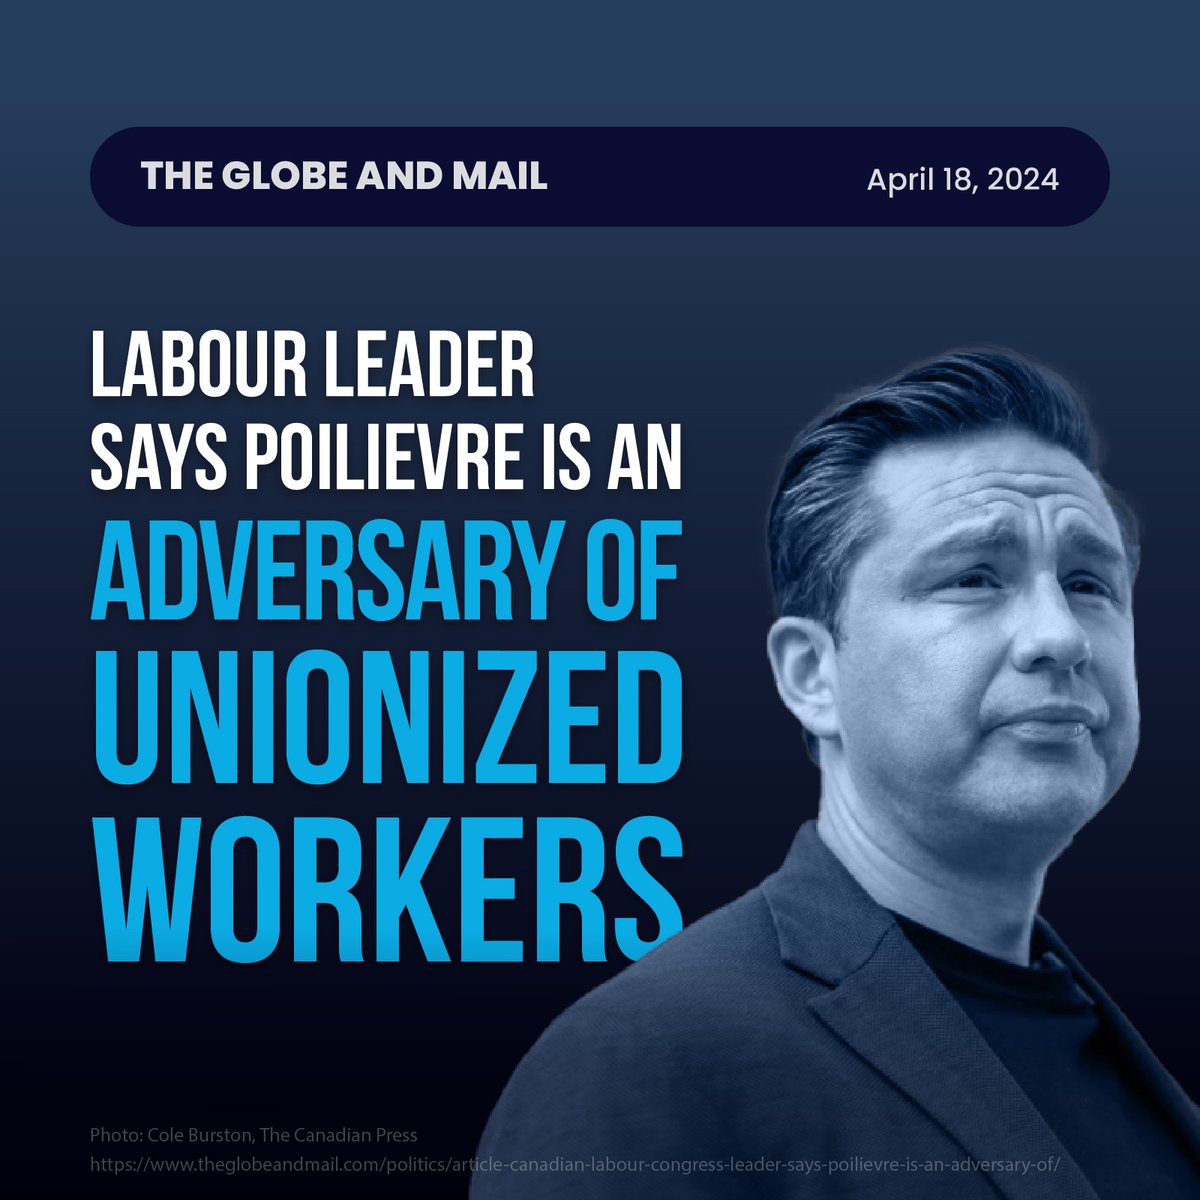 Pierre Poilievre won't stand up for Canadian workers.